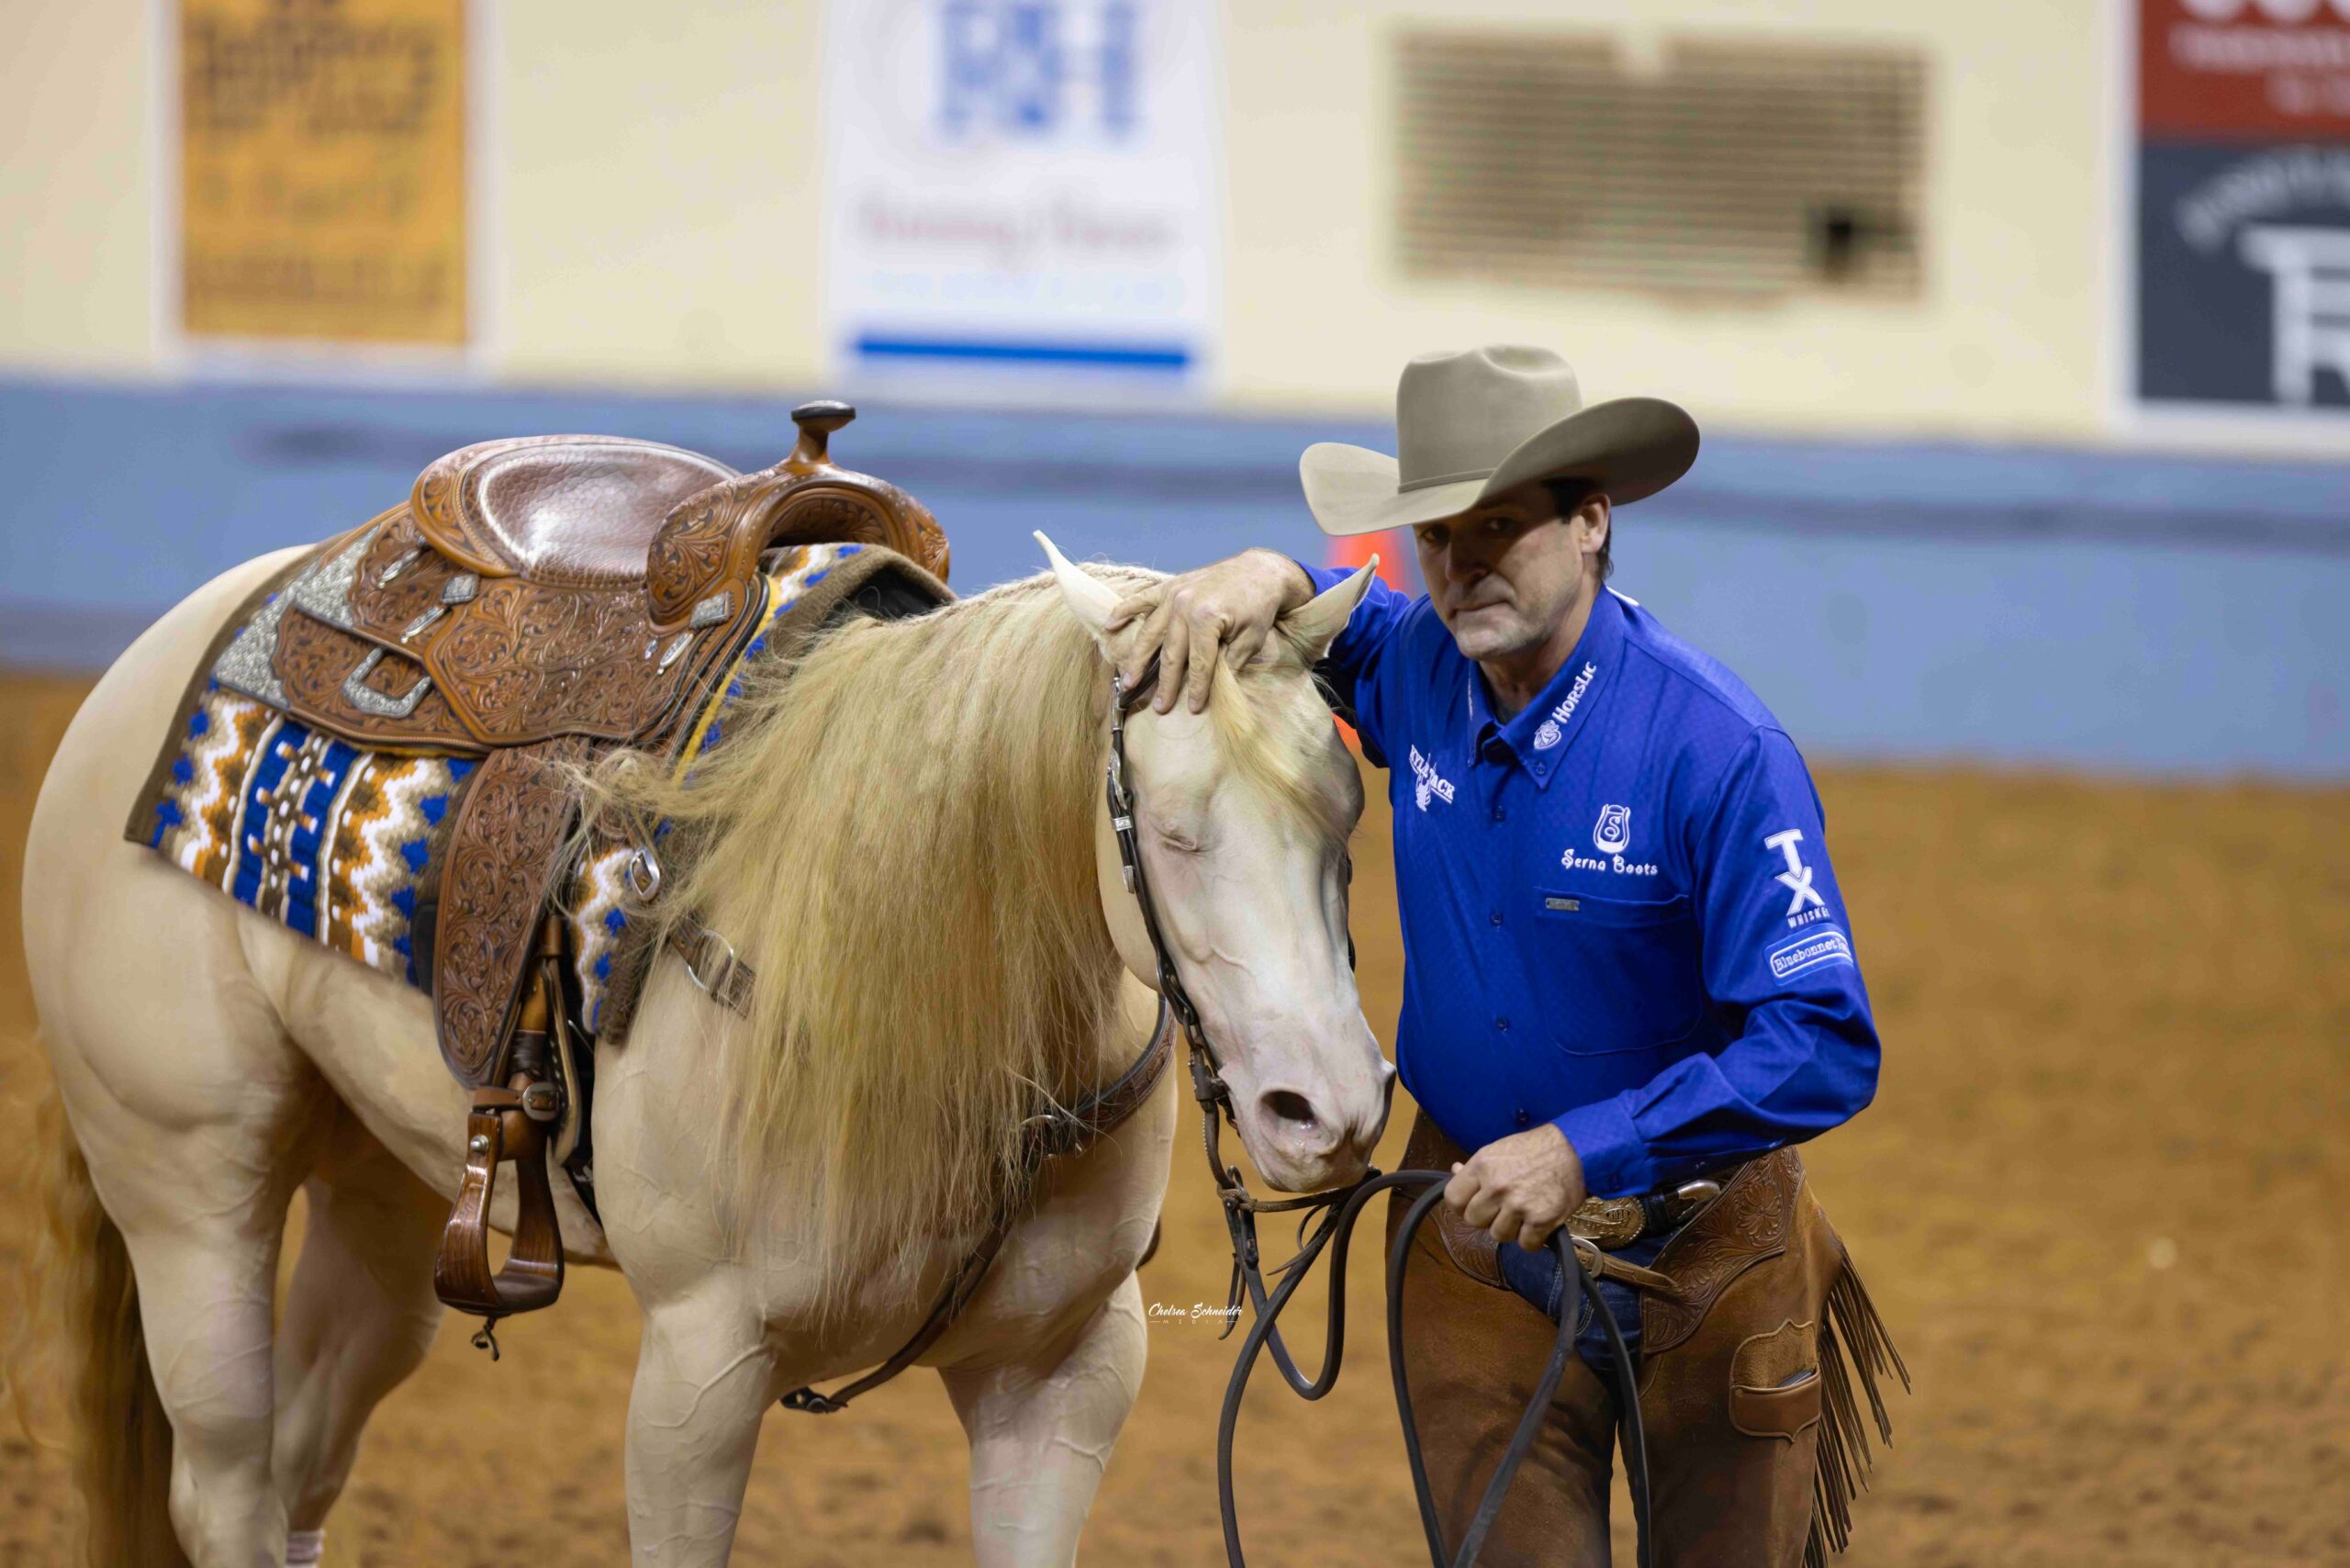 Brian Bell praising his horse after his first reining futurity on the mare Crystalized Whizkey.